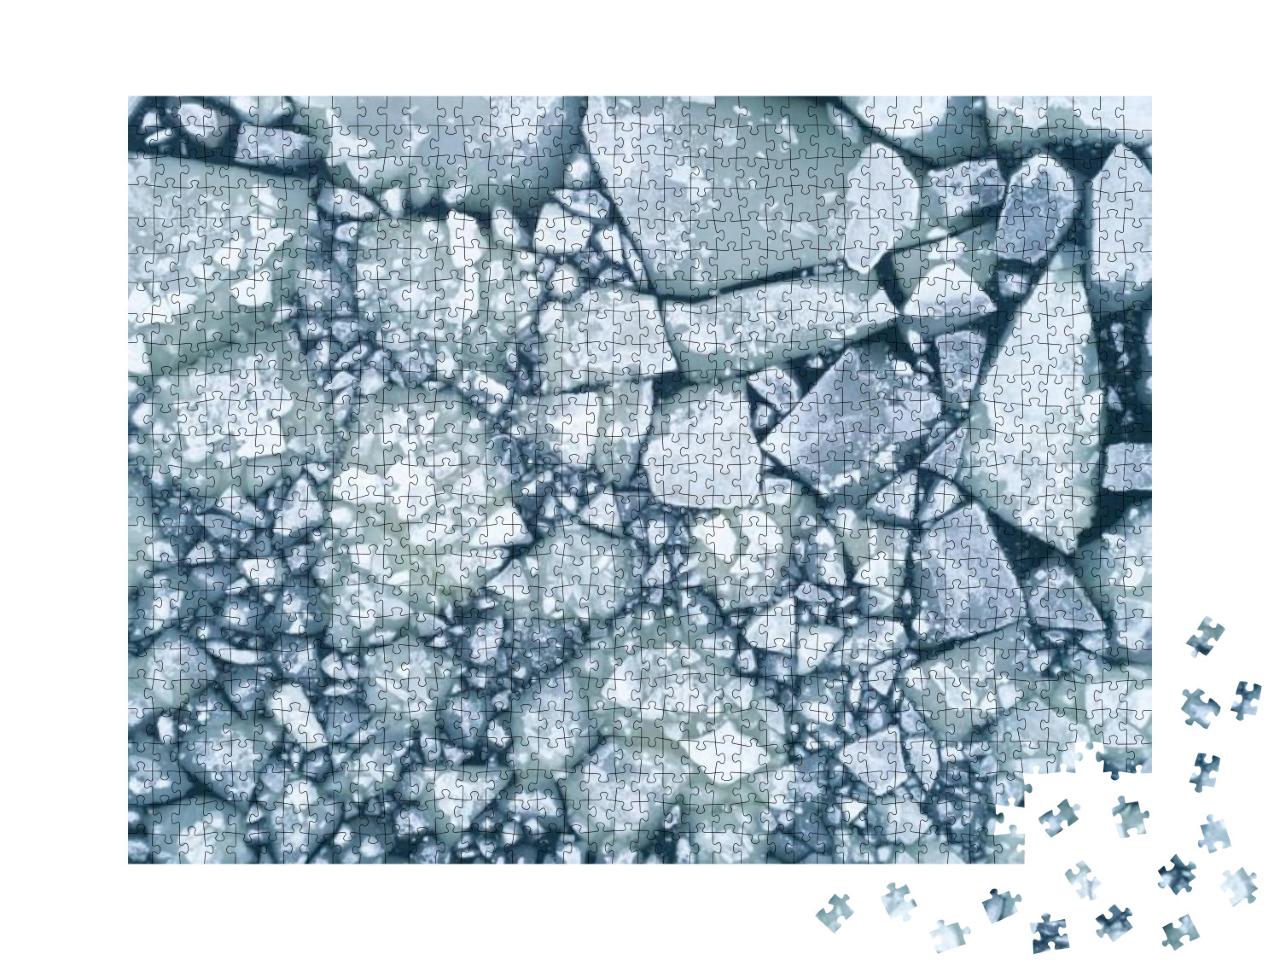 Abstract Texture of Broken White Ice & Dark Water At Wint... Jigsaw Puzzle with 1000 pieces